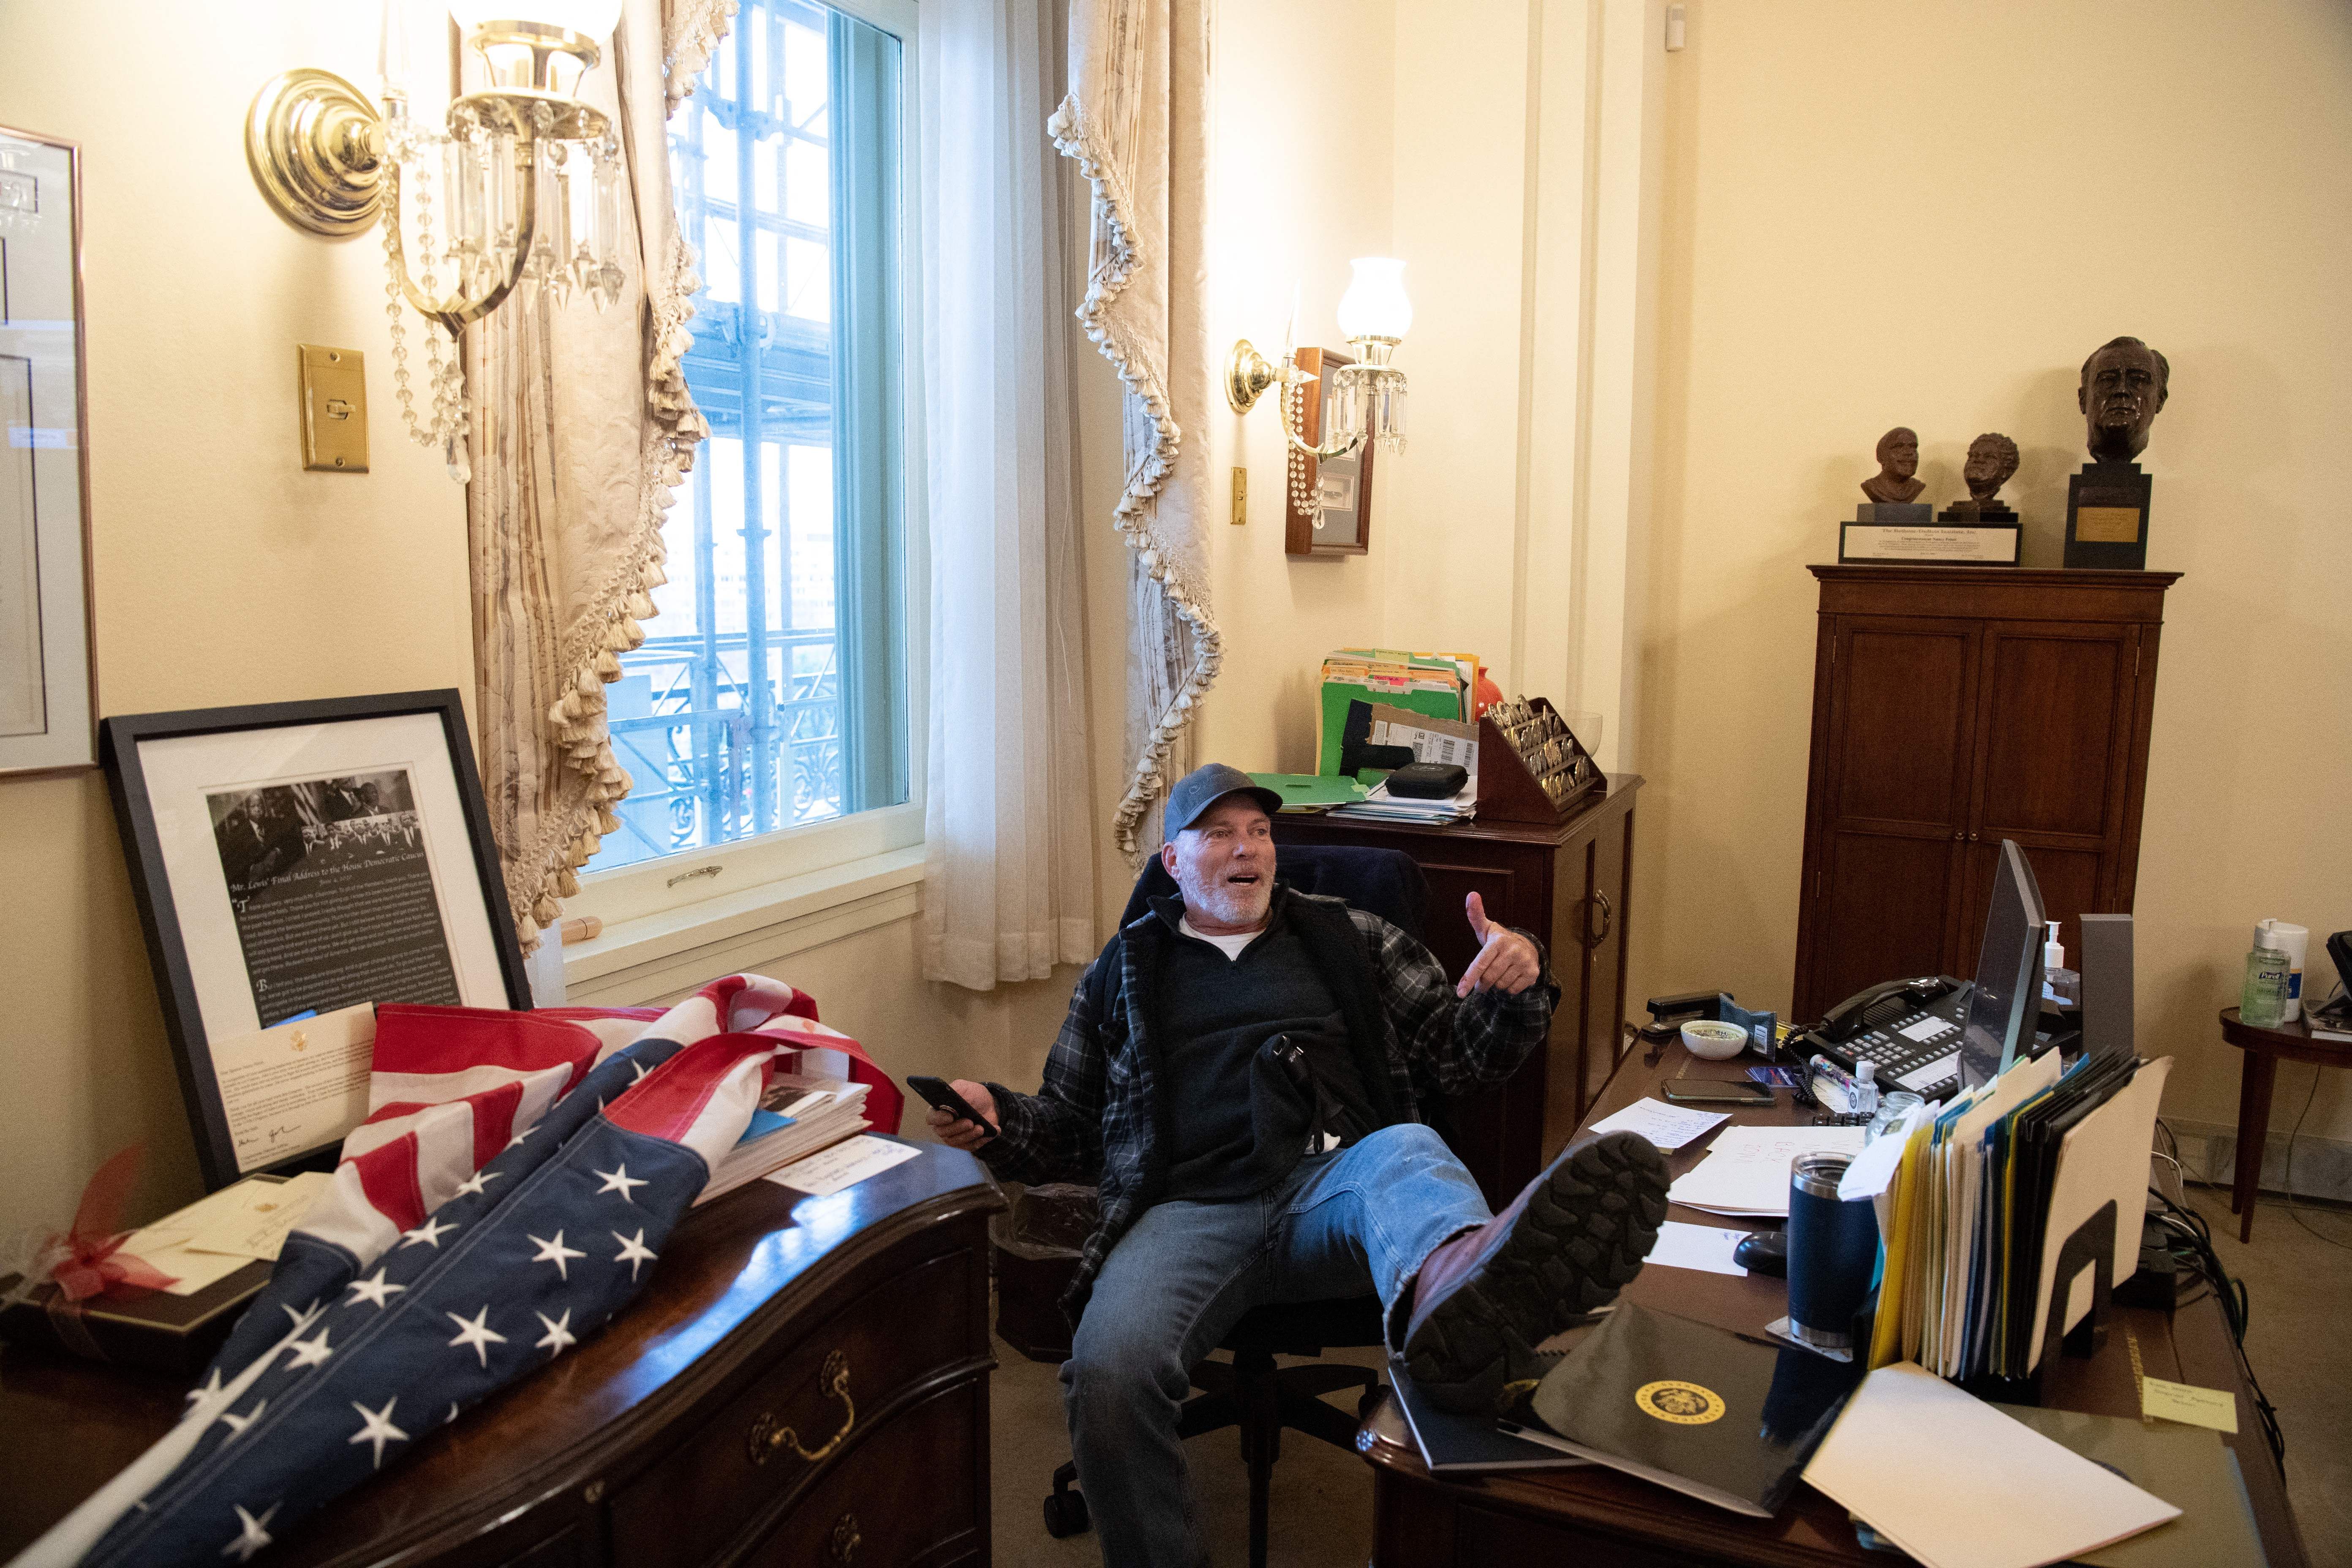 Picture of a man sitting on Nancy Pelosi's desk chair